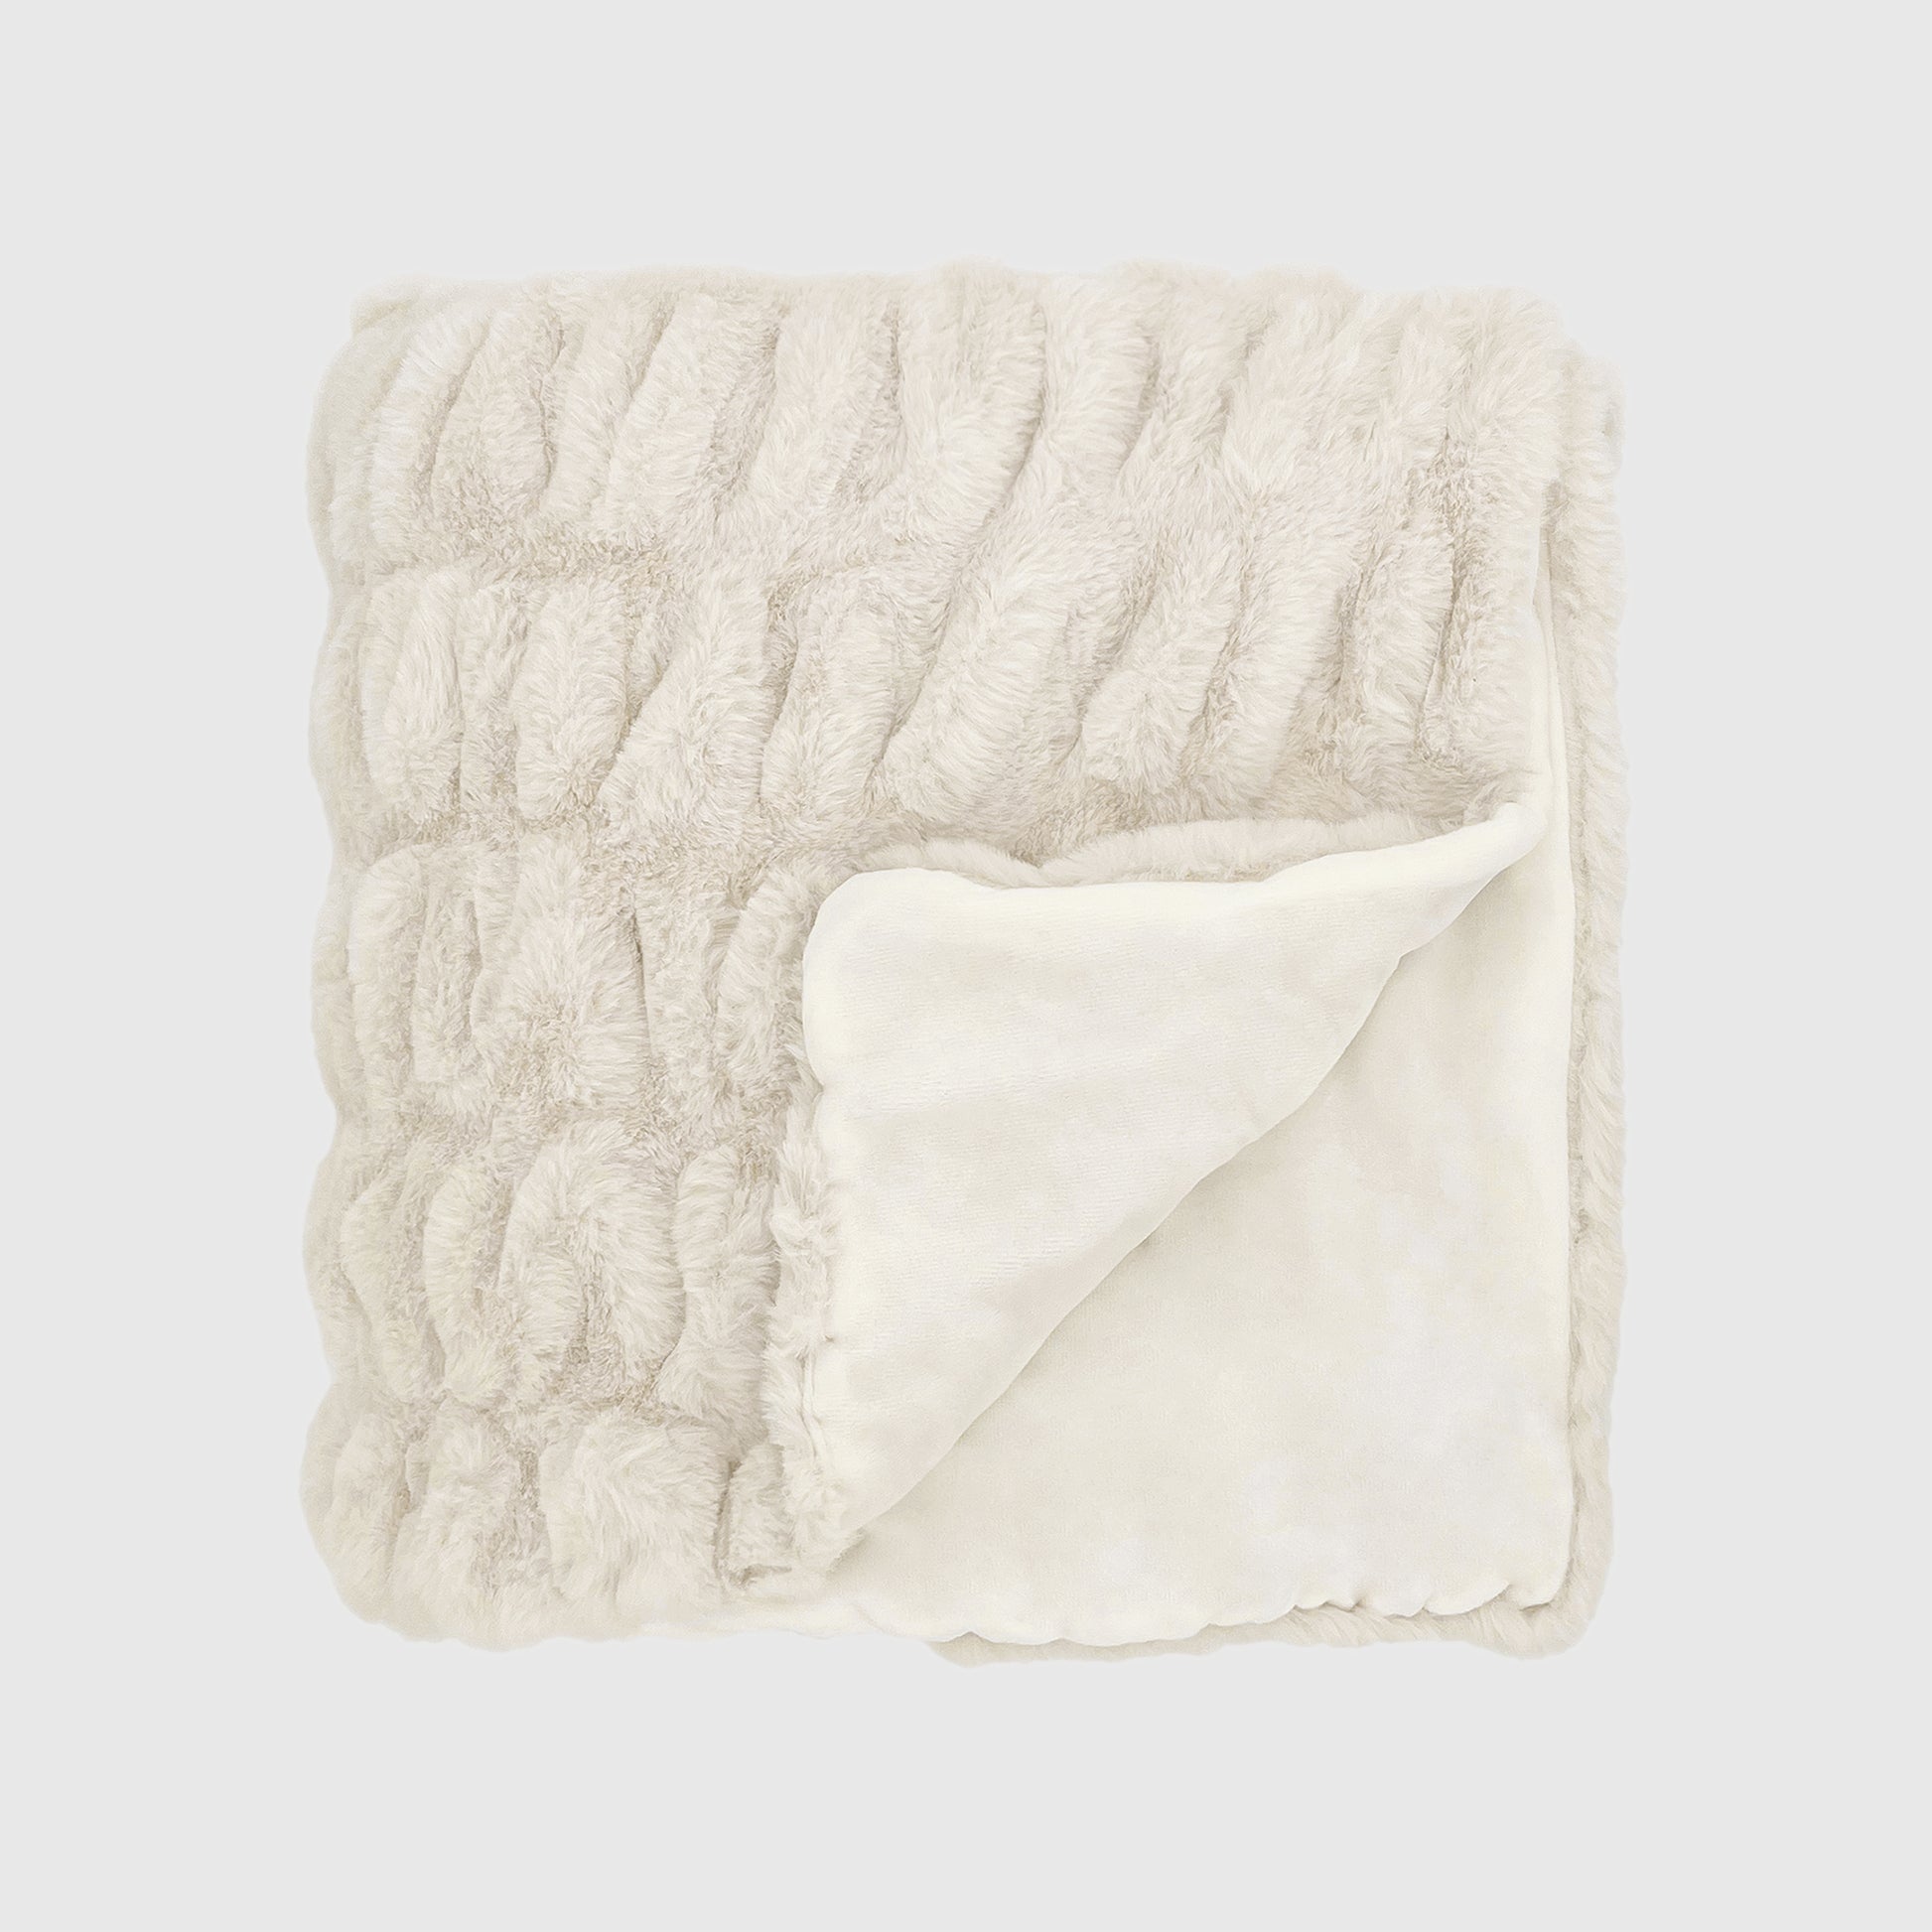  The Mood Mallow Faux Fur Throw, 50x60 in., Coconut (Beige)